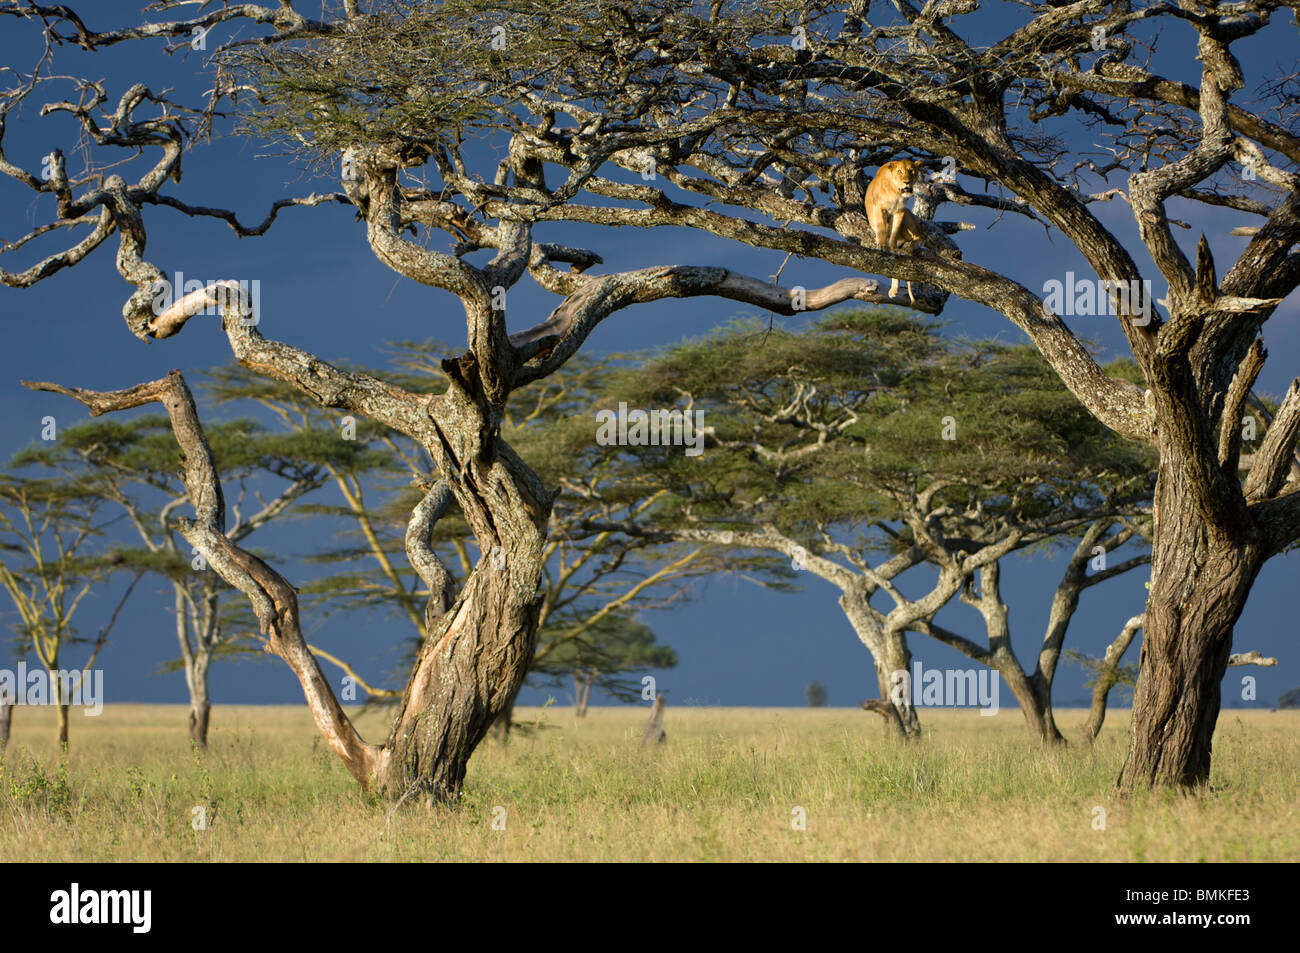 African Lioness using tree as a lookout, Nogorongoro Conservation Area, Serengeti National Park, Tanzania. Stock Photo